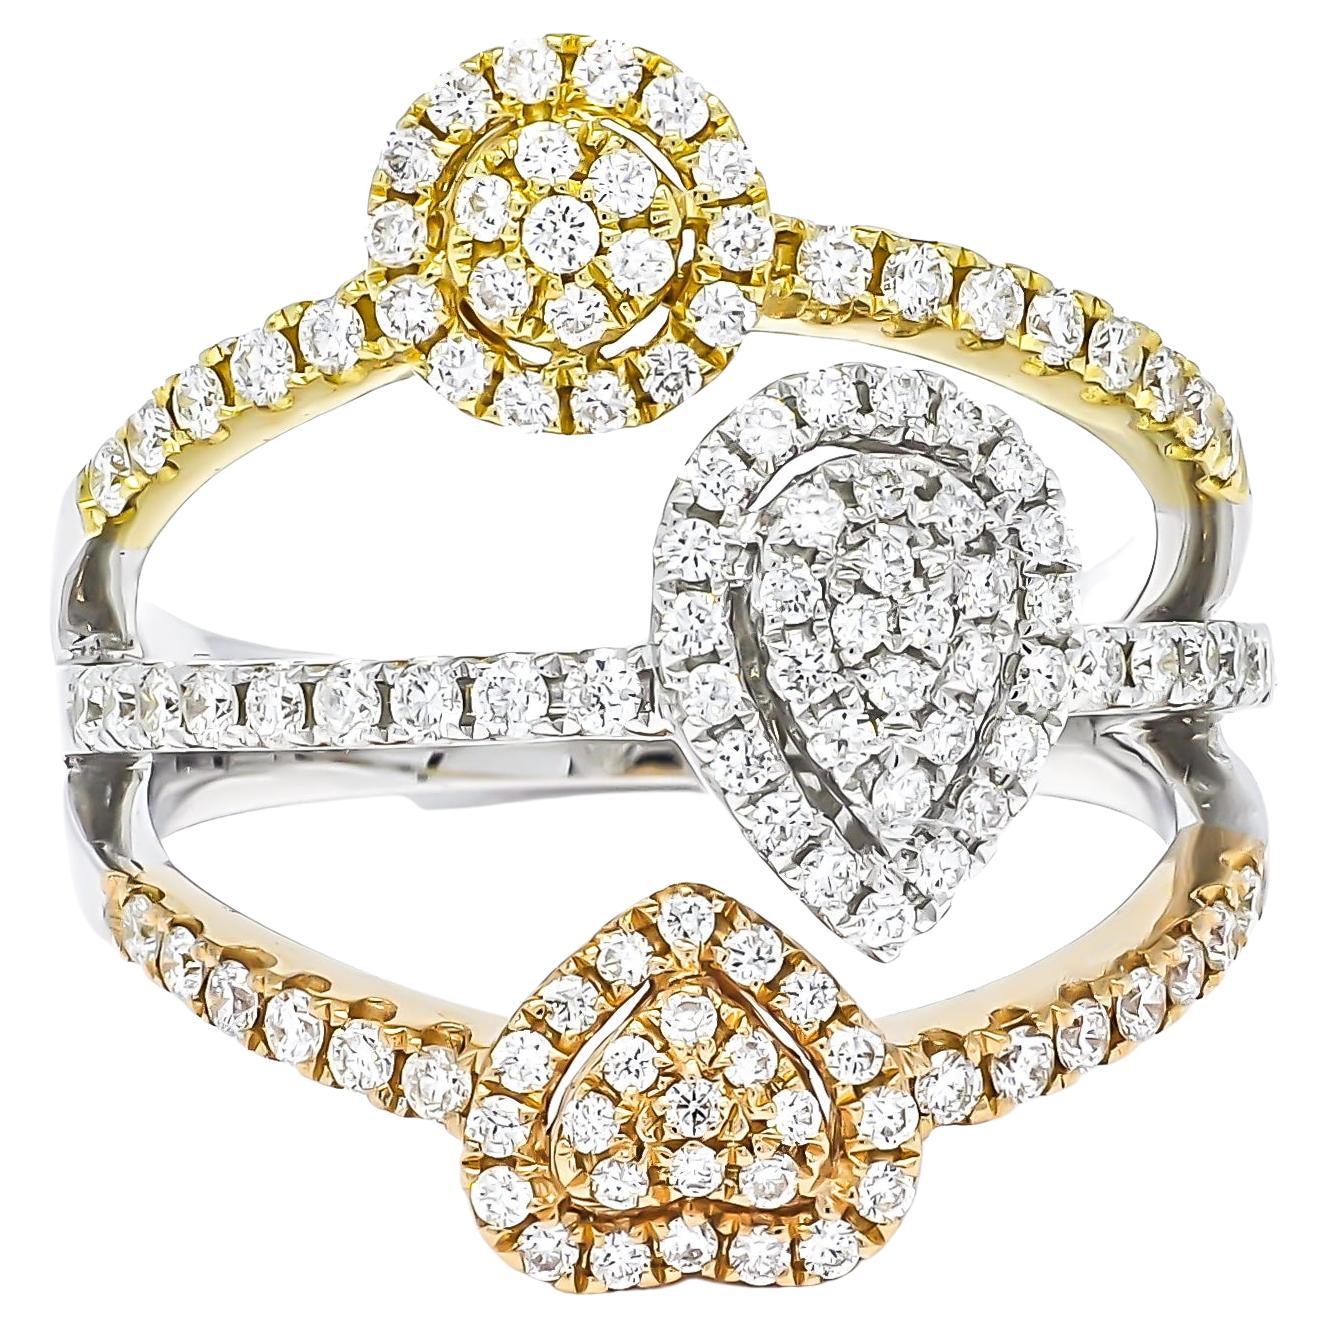 Beautifully Created for any occasion.

Astounding elegance and astonishing shine emanate from every facet of this incredibly beautiful. Fashioned in a fabulous 3 cluster illusion, this ring incorporates round-shape set in multi shape cluster halo